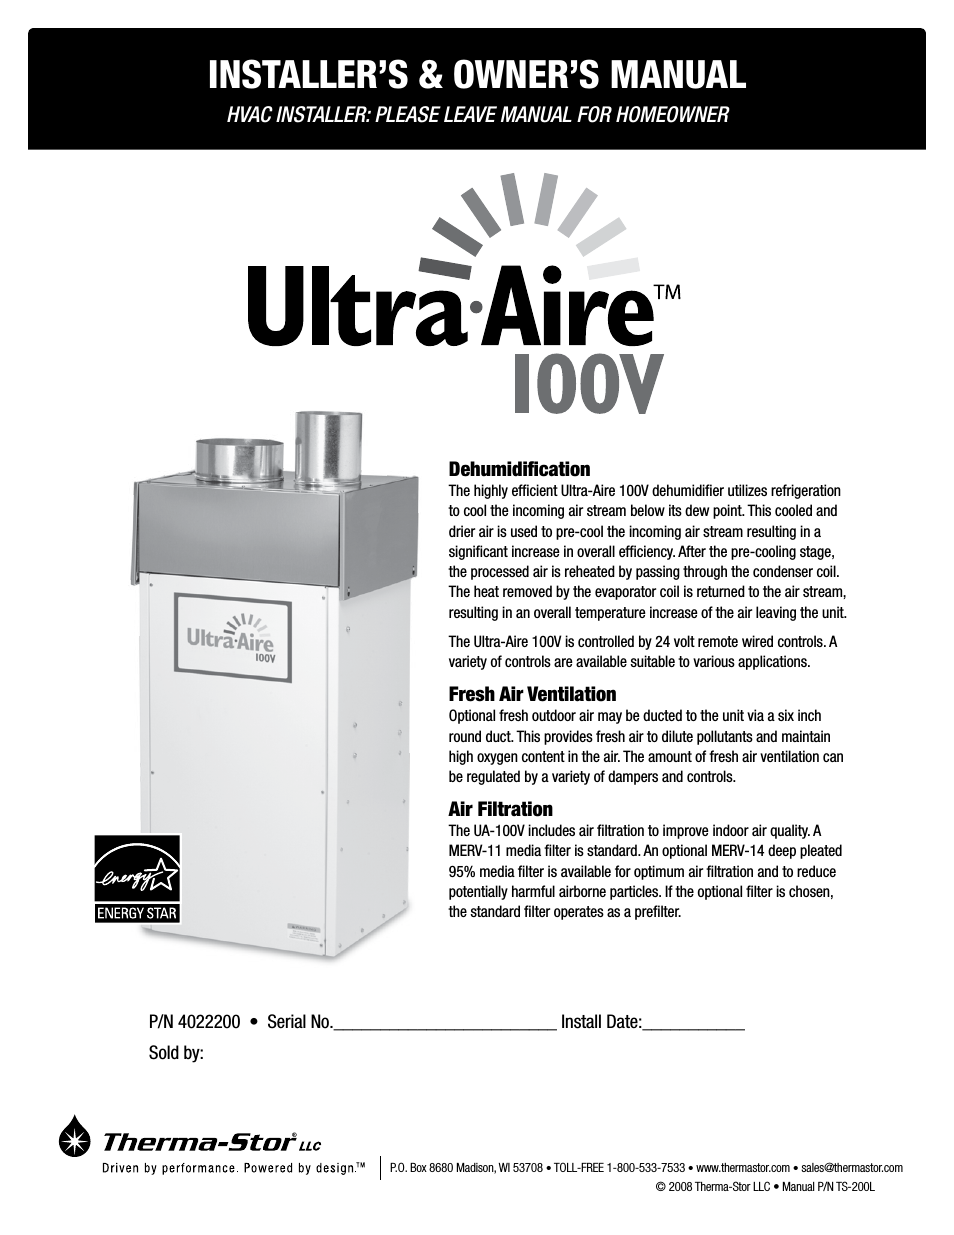 Ultra-Aire 100V